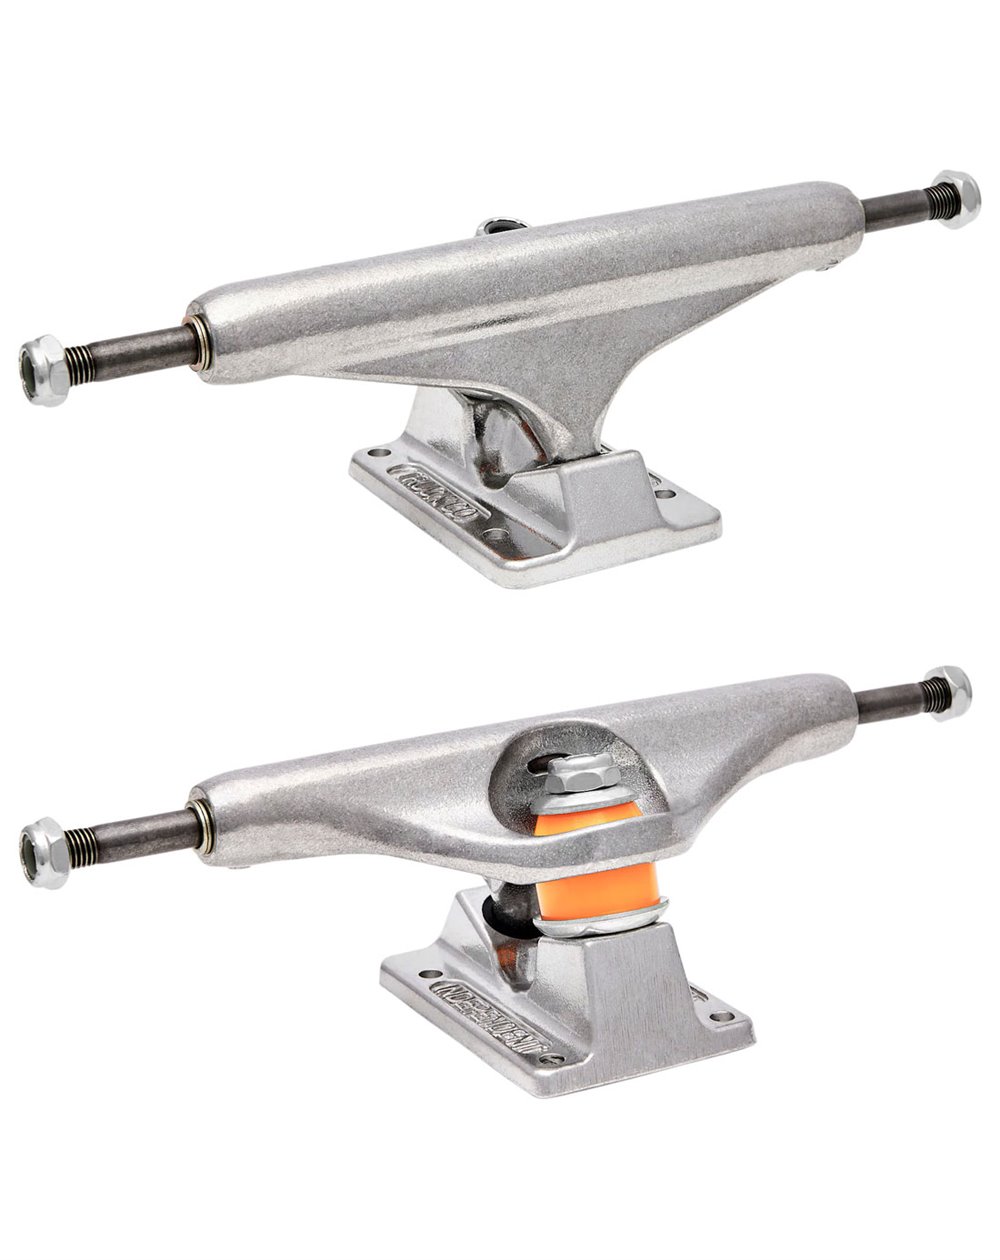 Independent Stage XI Standard 159mm Skateboard Trucks pack of 2